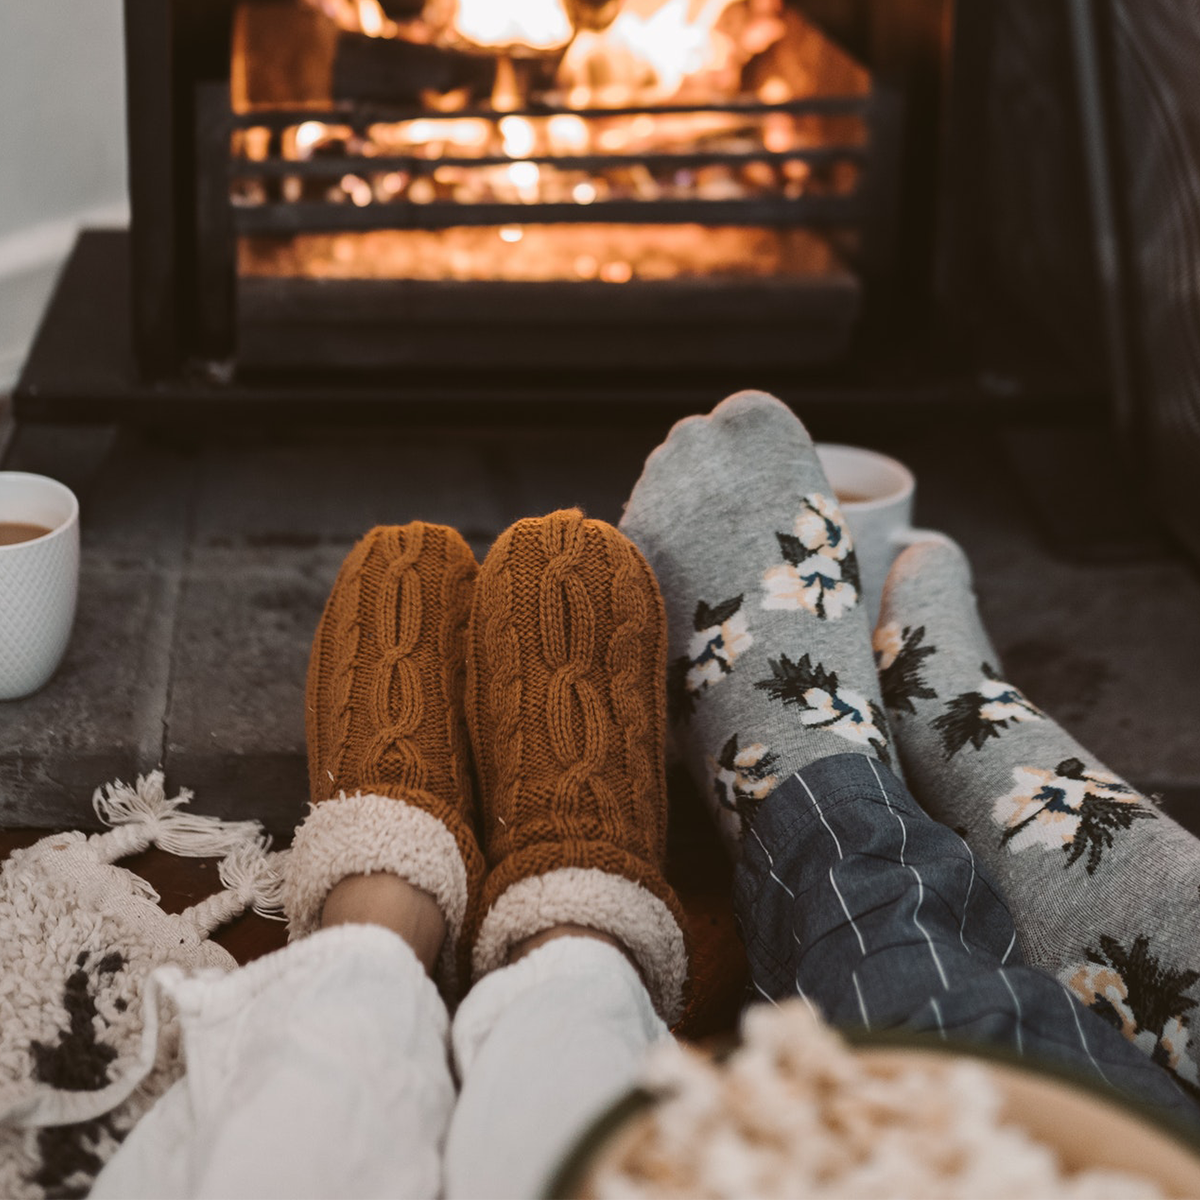 Warming feet at the fireplace